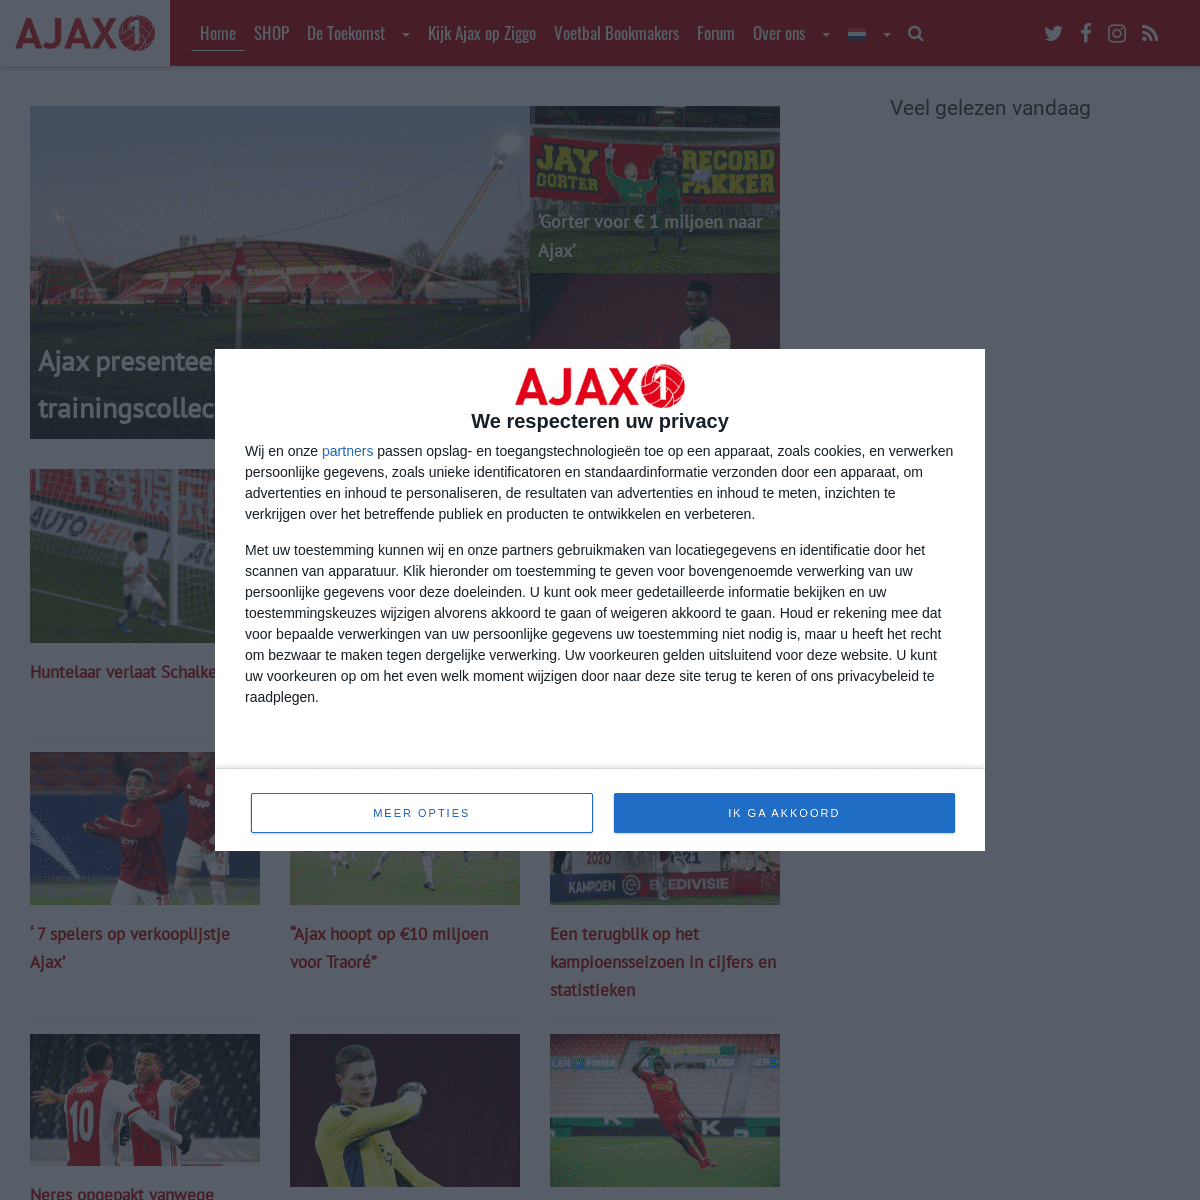 A complete backup of https://ajax1.nl